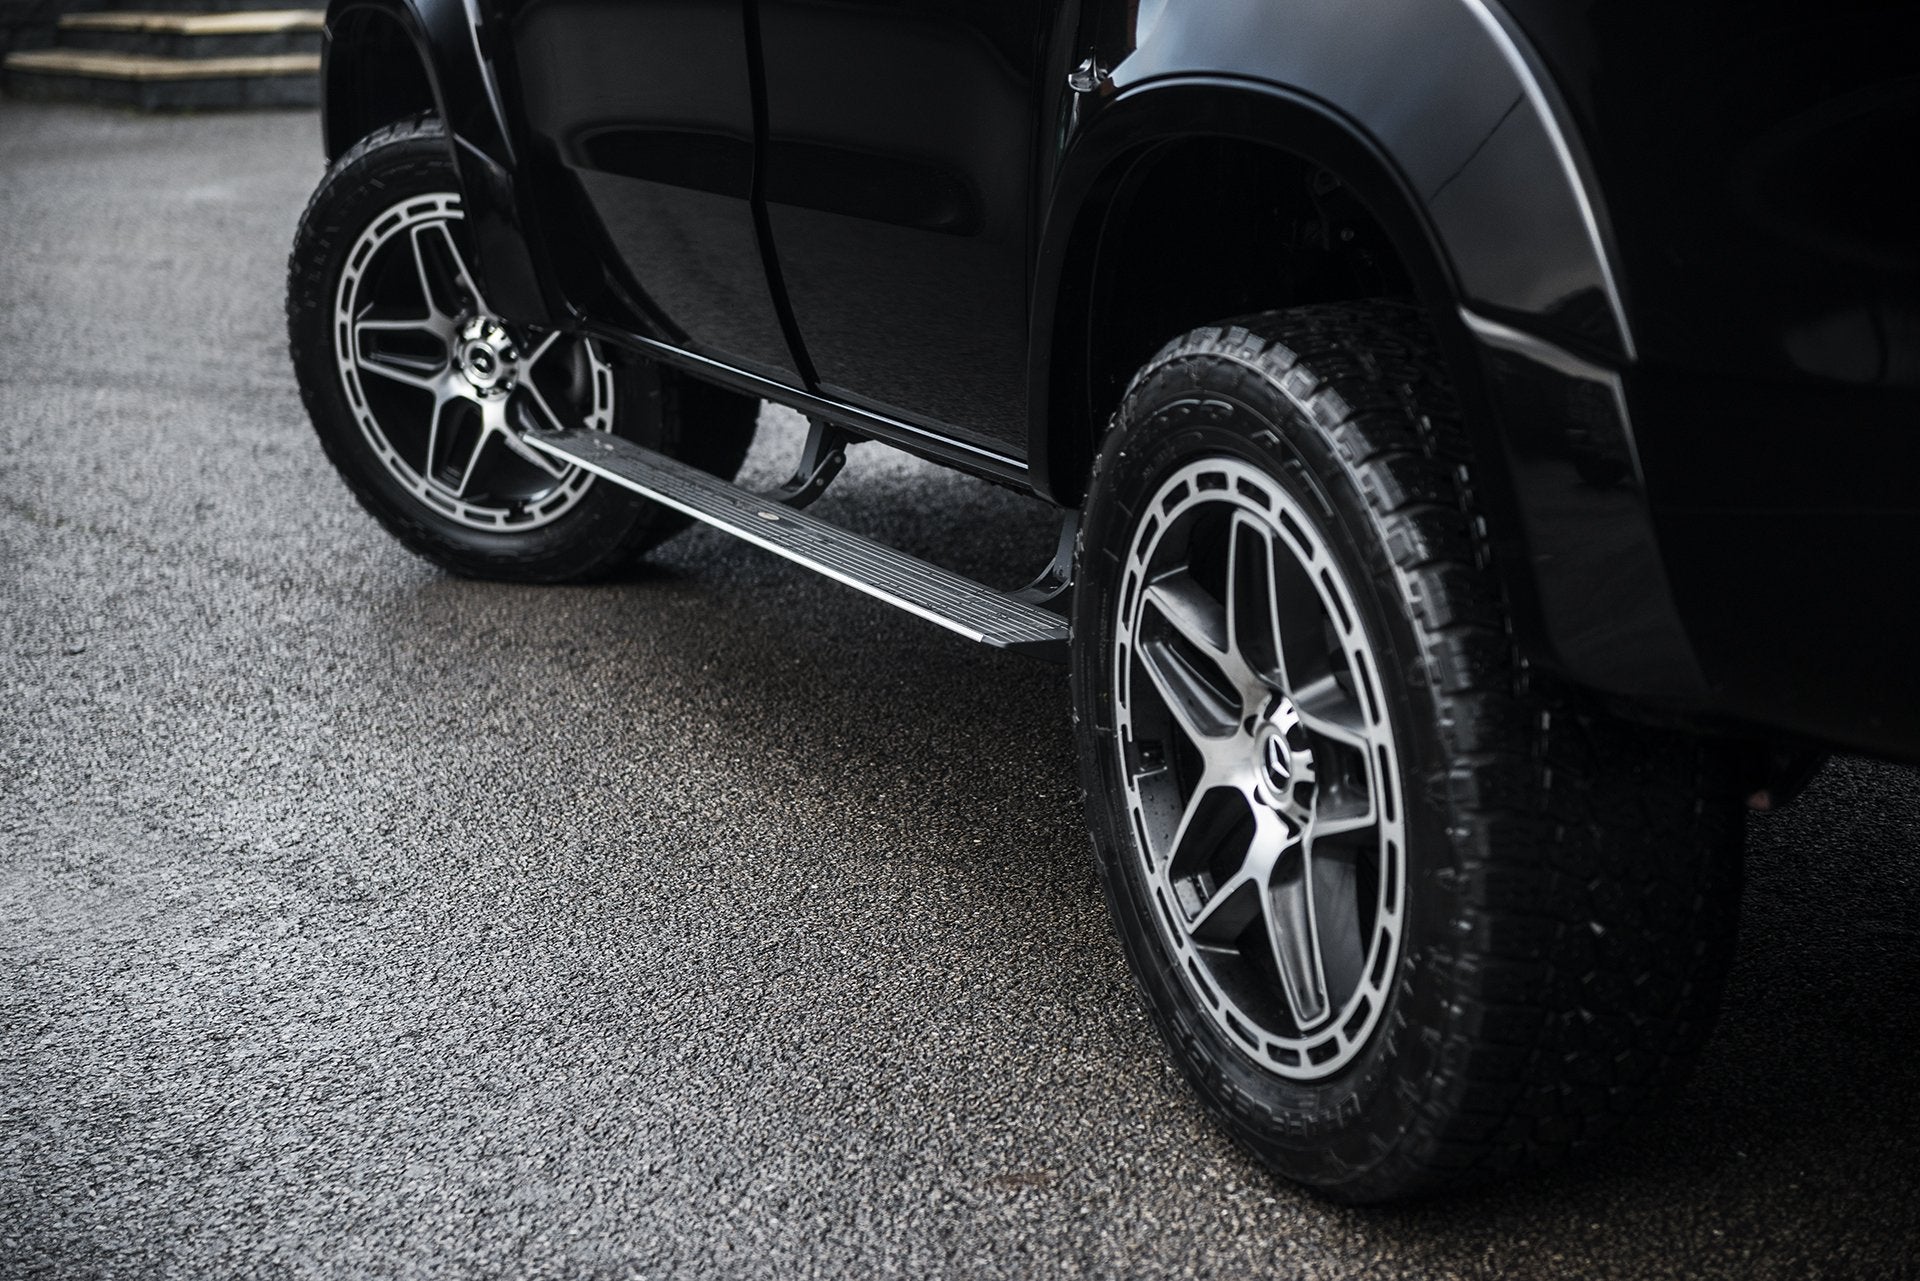 Mercedes X-Class (2019-Present) Deployable Electric Side Steps by Kahn - Image 2785